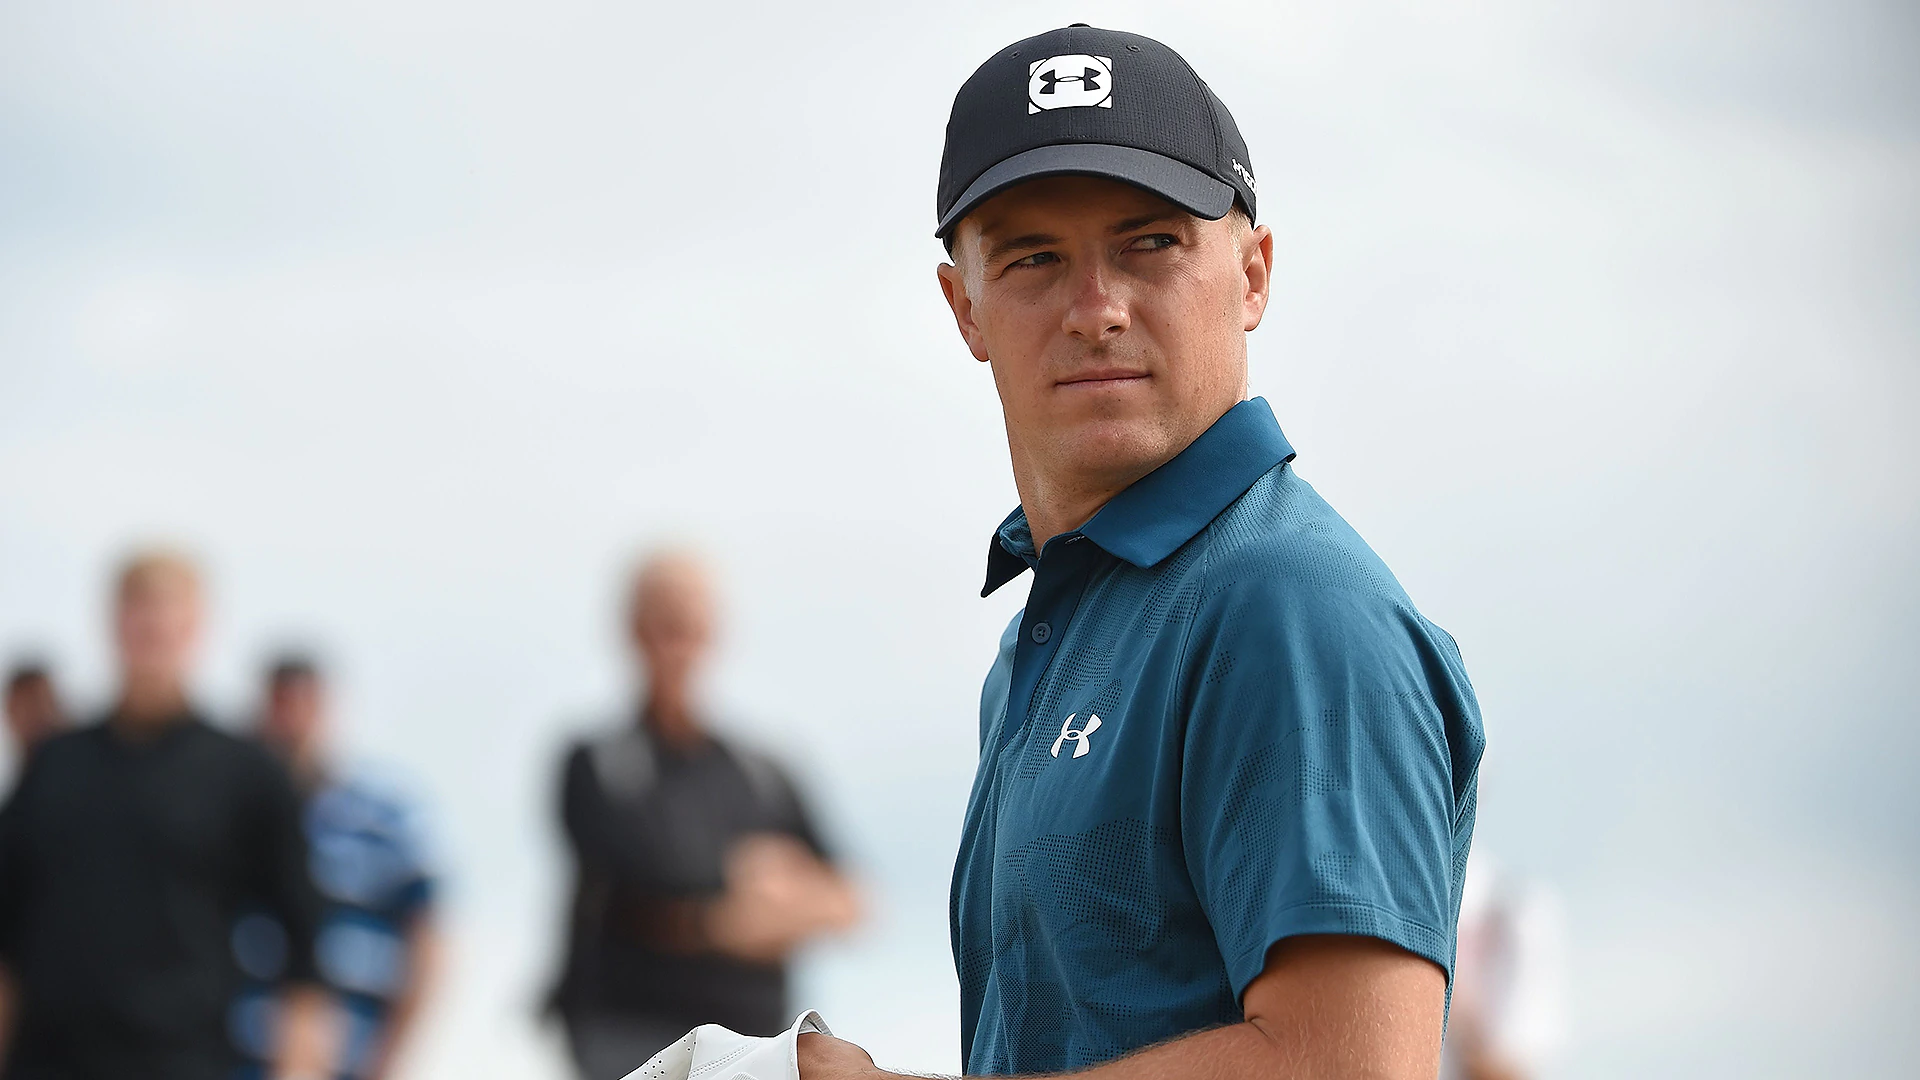 Spieth opens as betting favorite for 2019 Masters